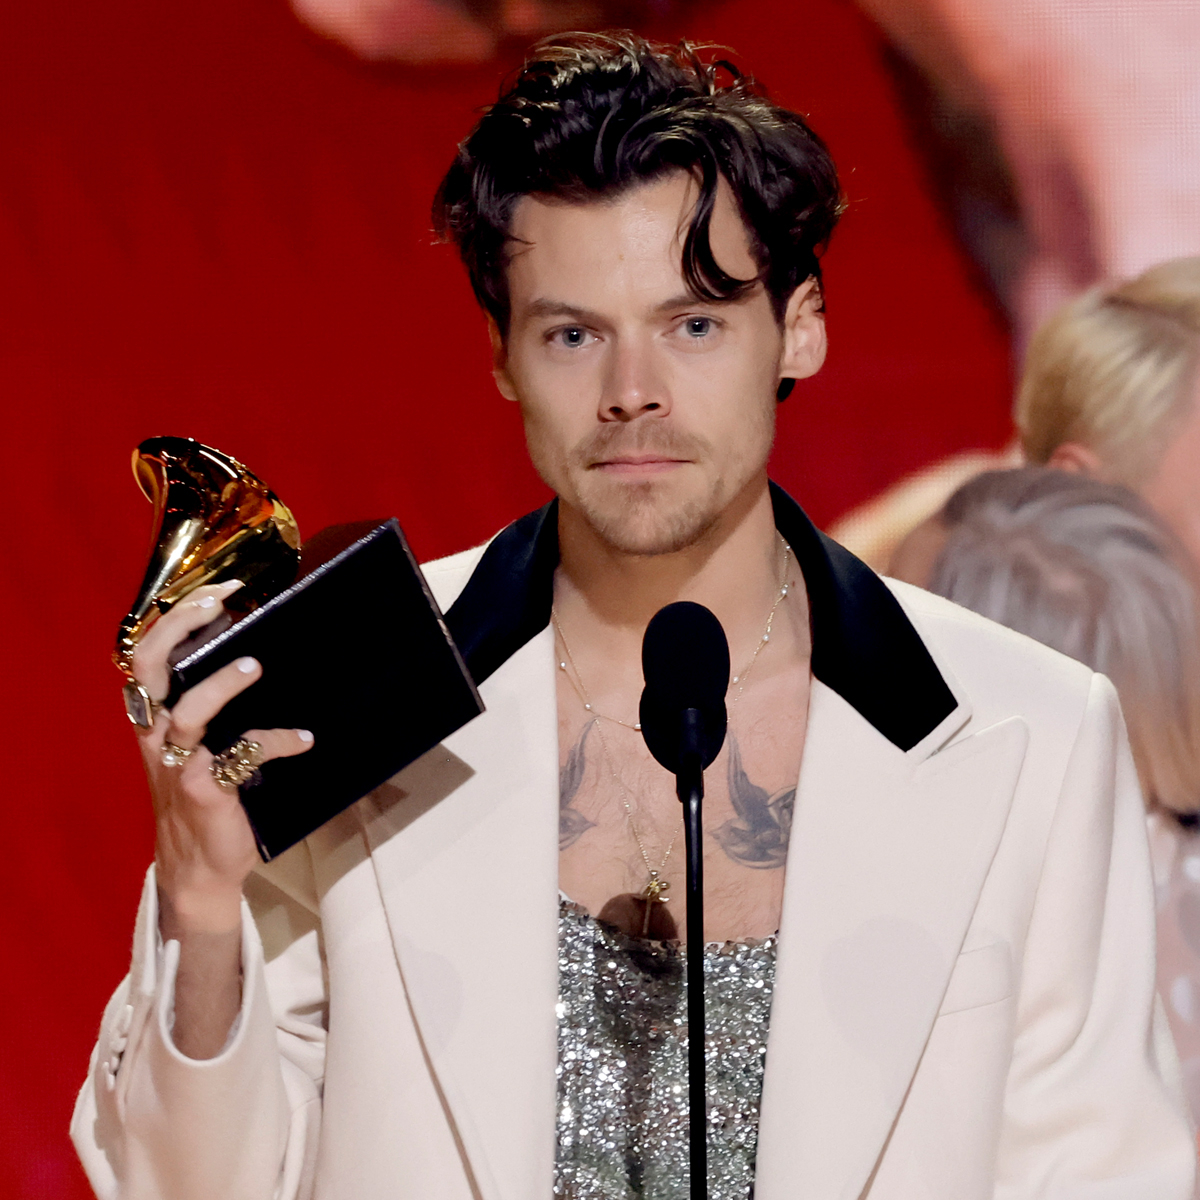 Harry Styles Made a Big Change and Fans Are Shaken